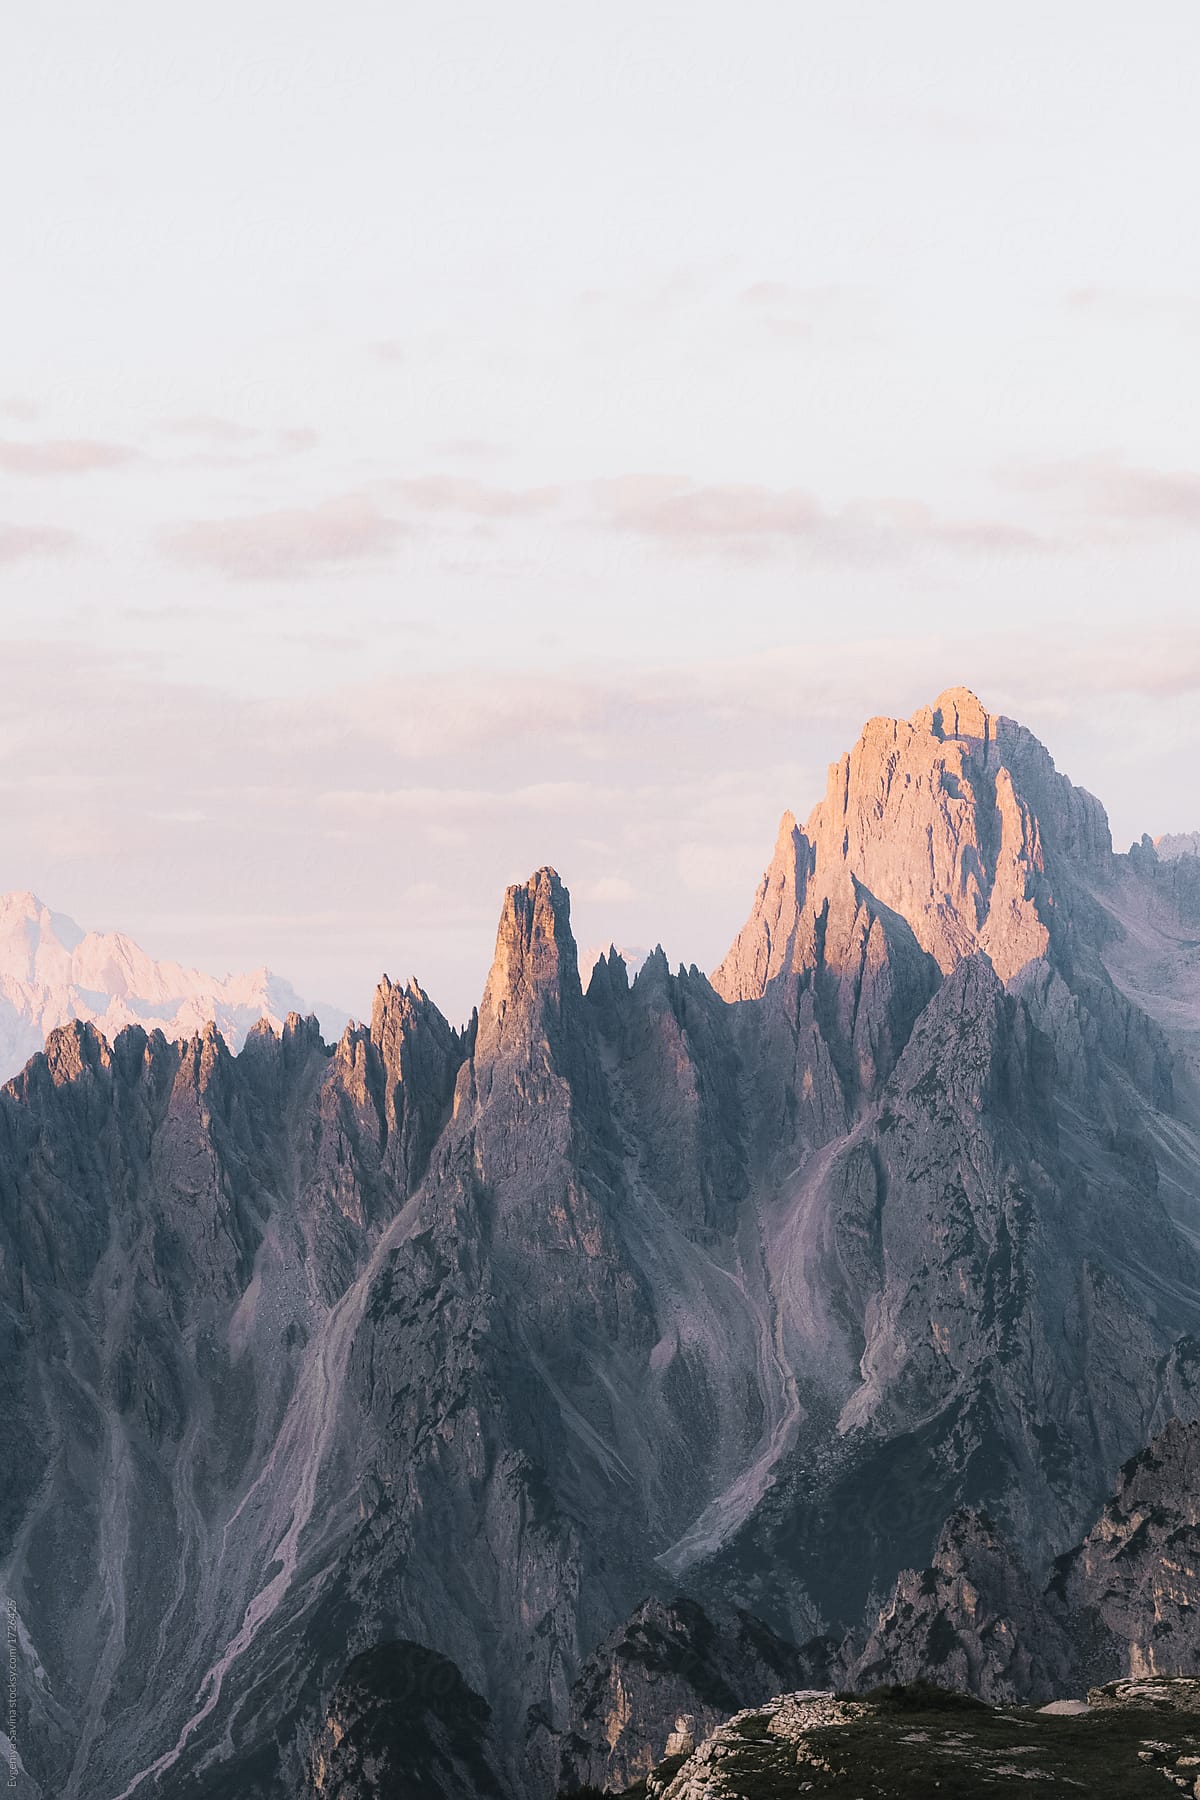 Dolomiti mountains during the sunrise coloured in pink, blue and velvet tones